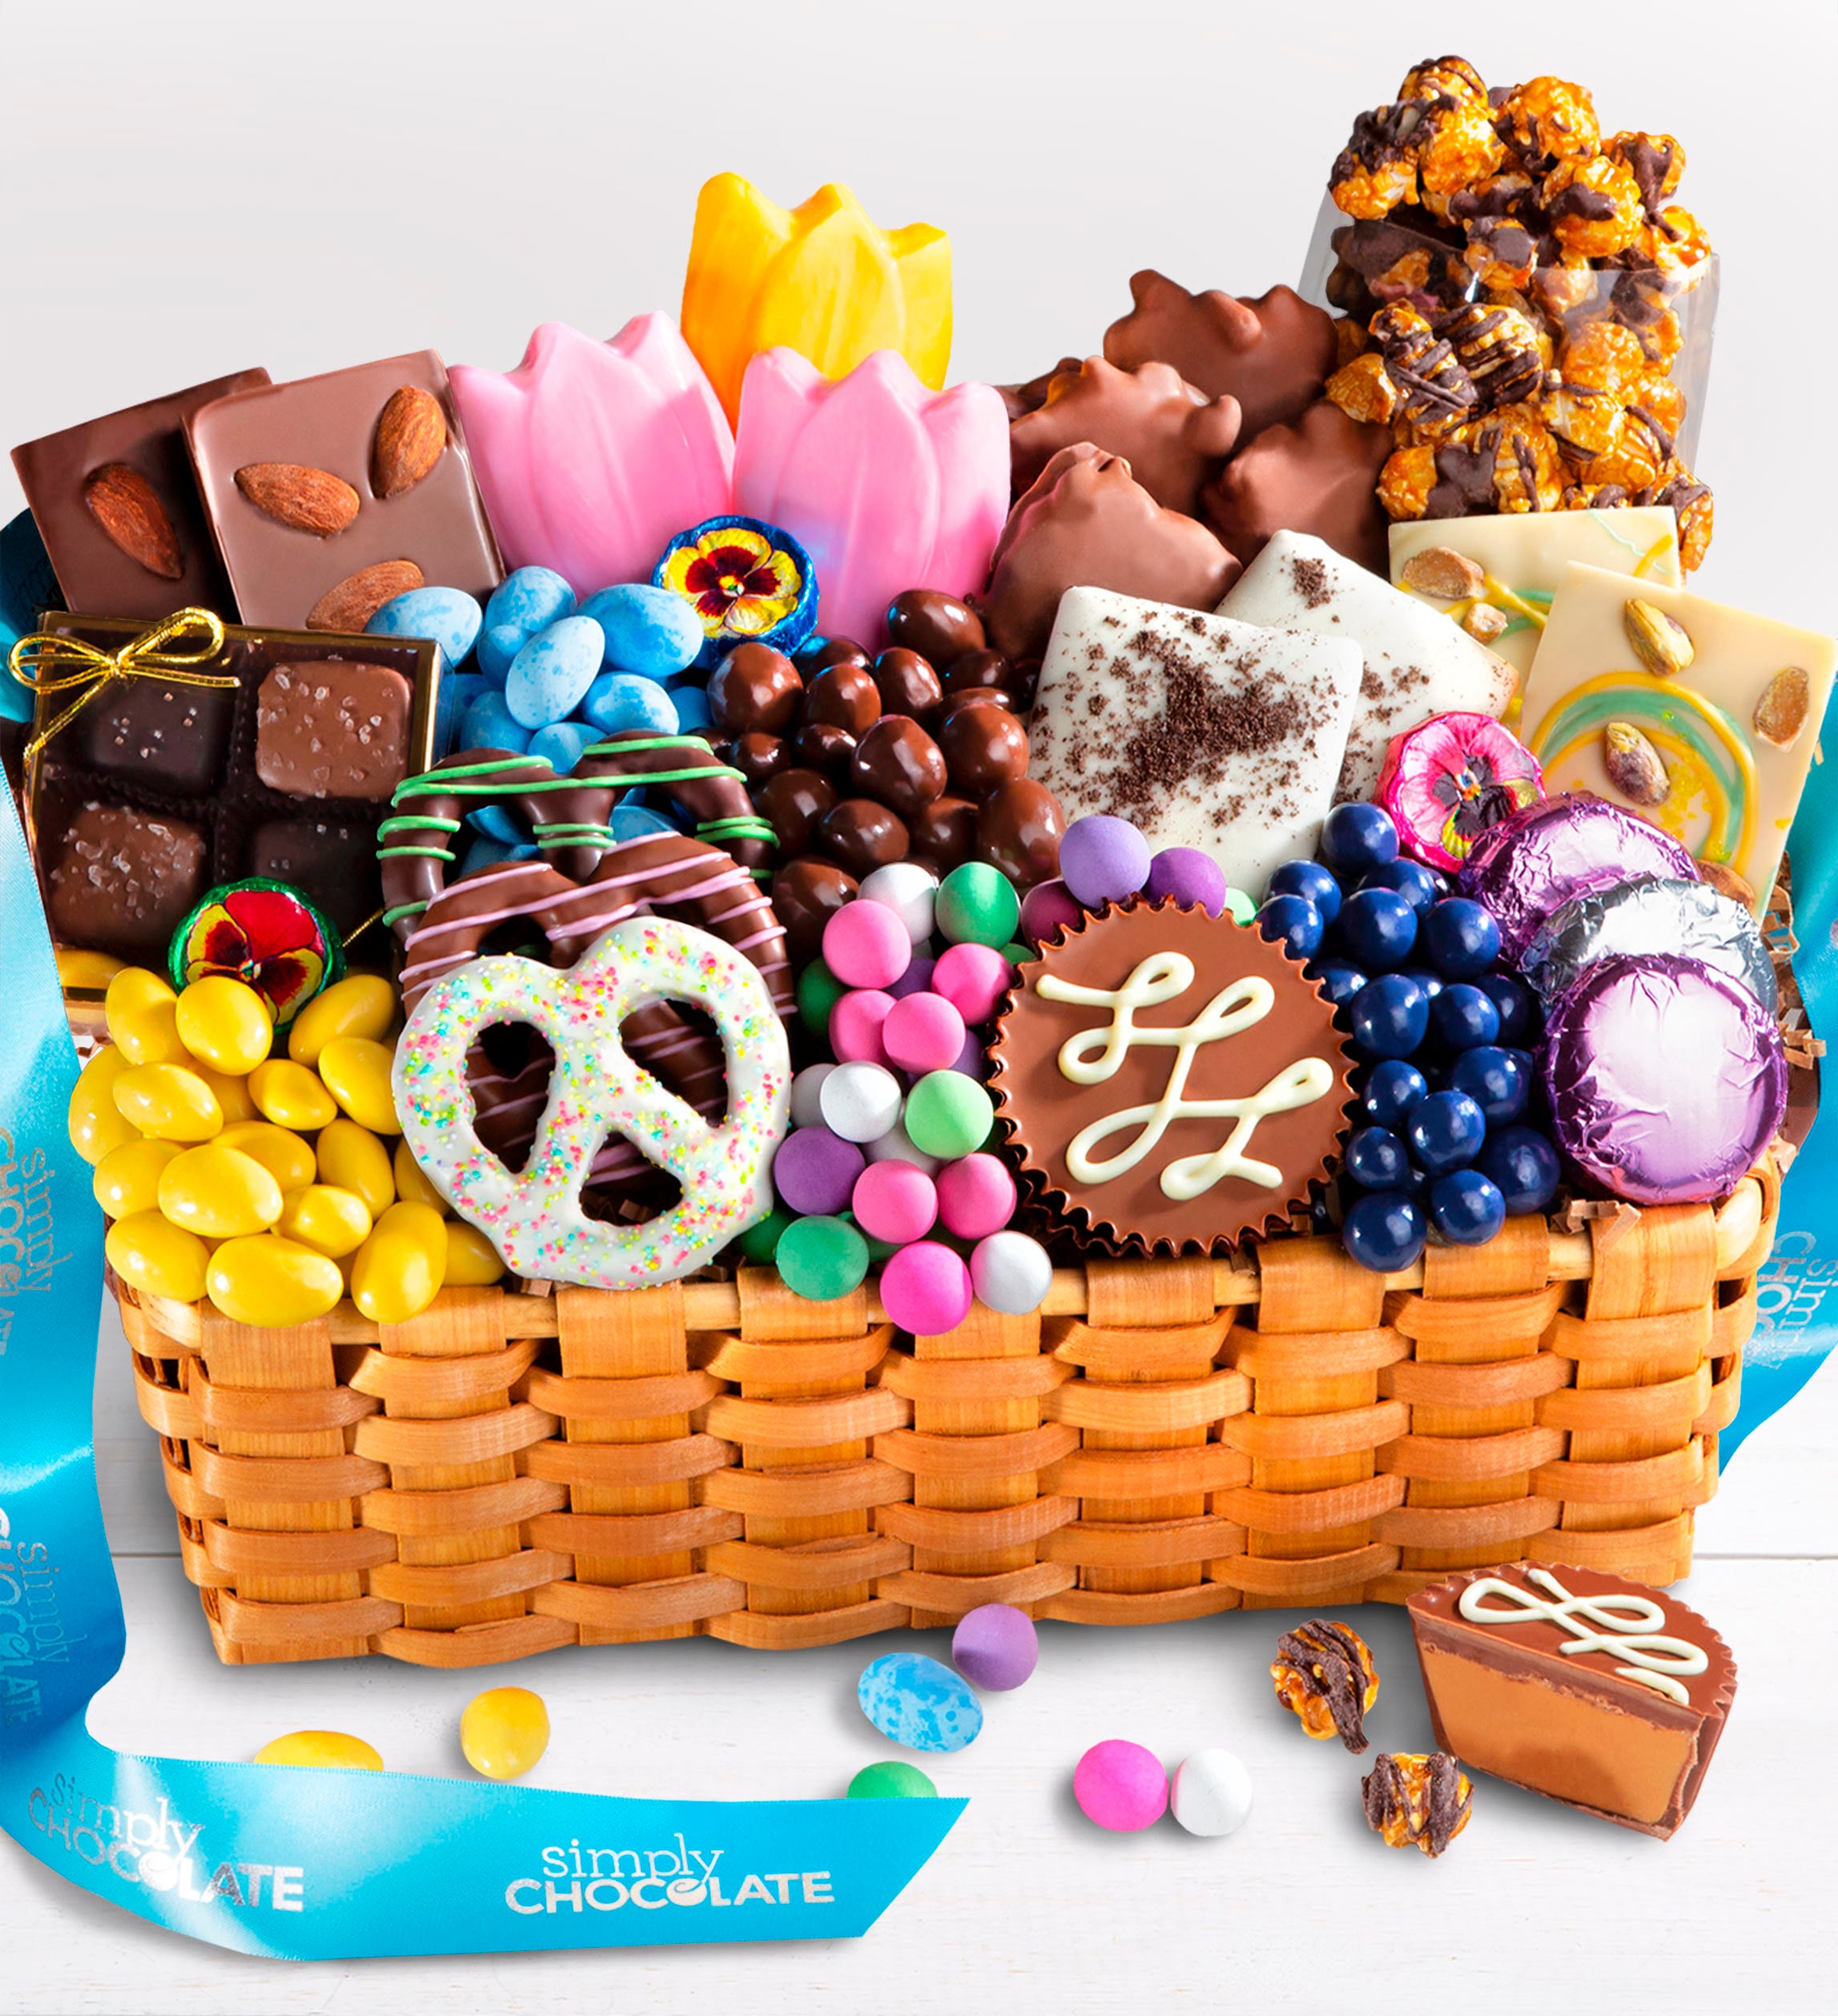 Send amazing chocolate gift basket to Bangalore, Free Delivery - redblooms